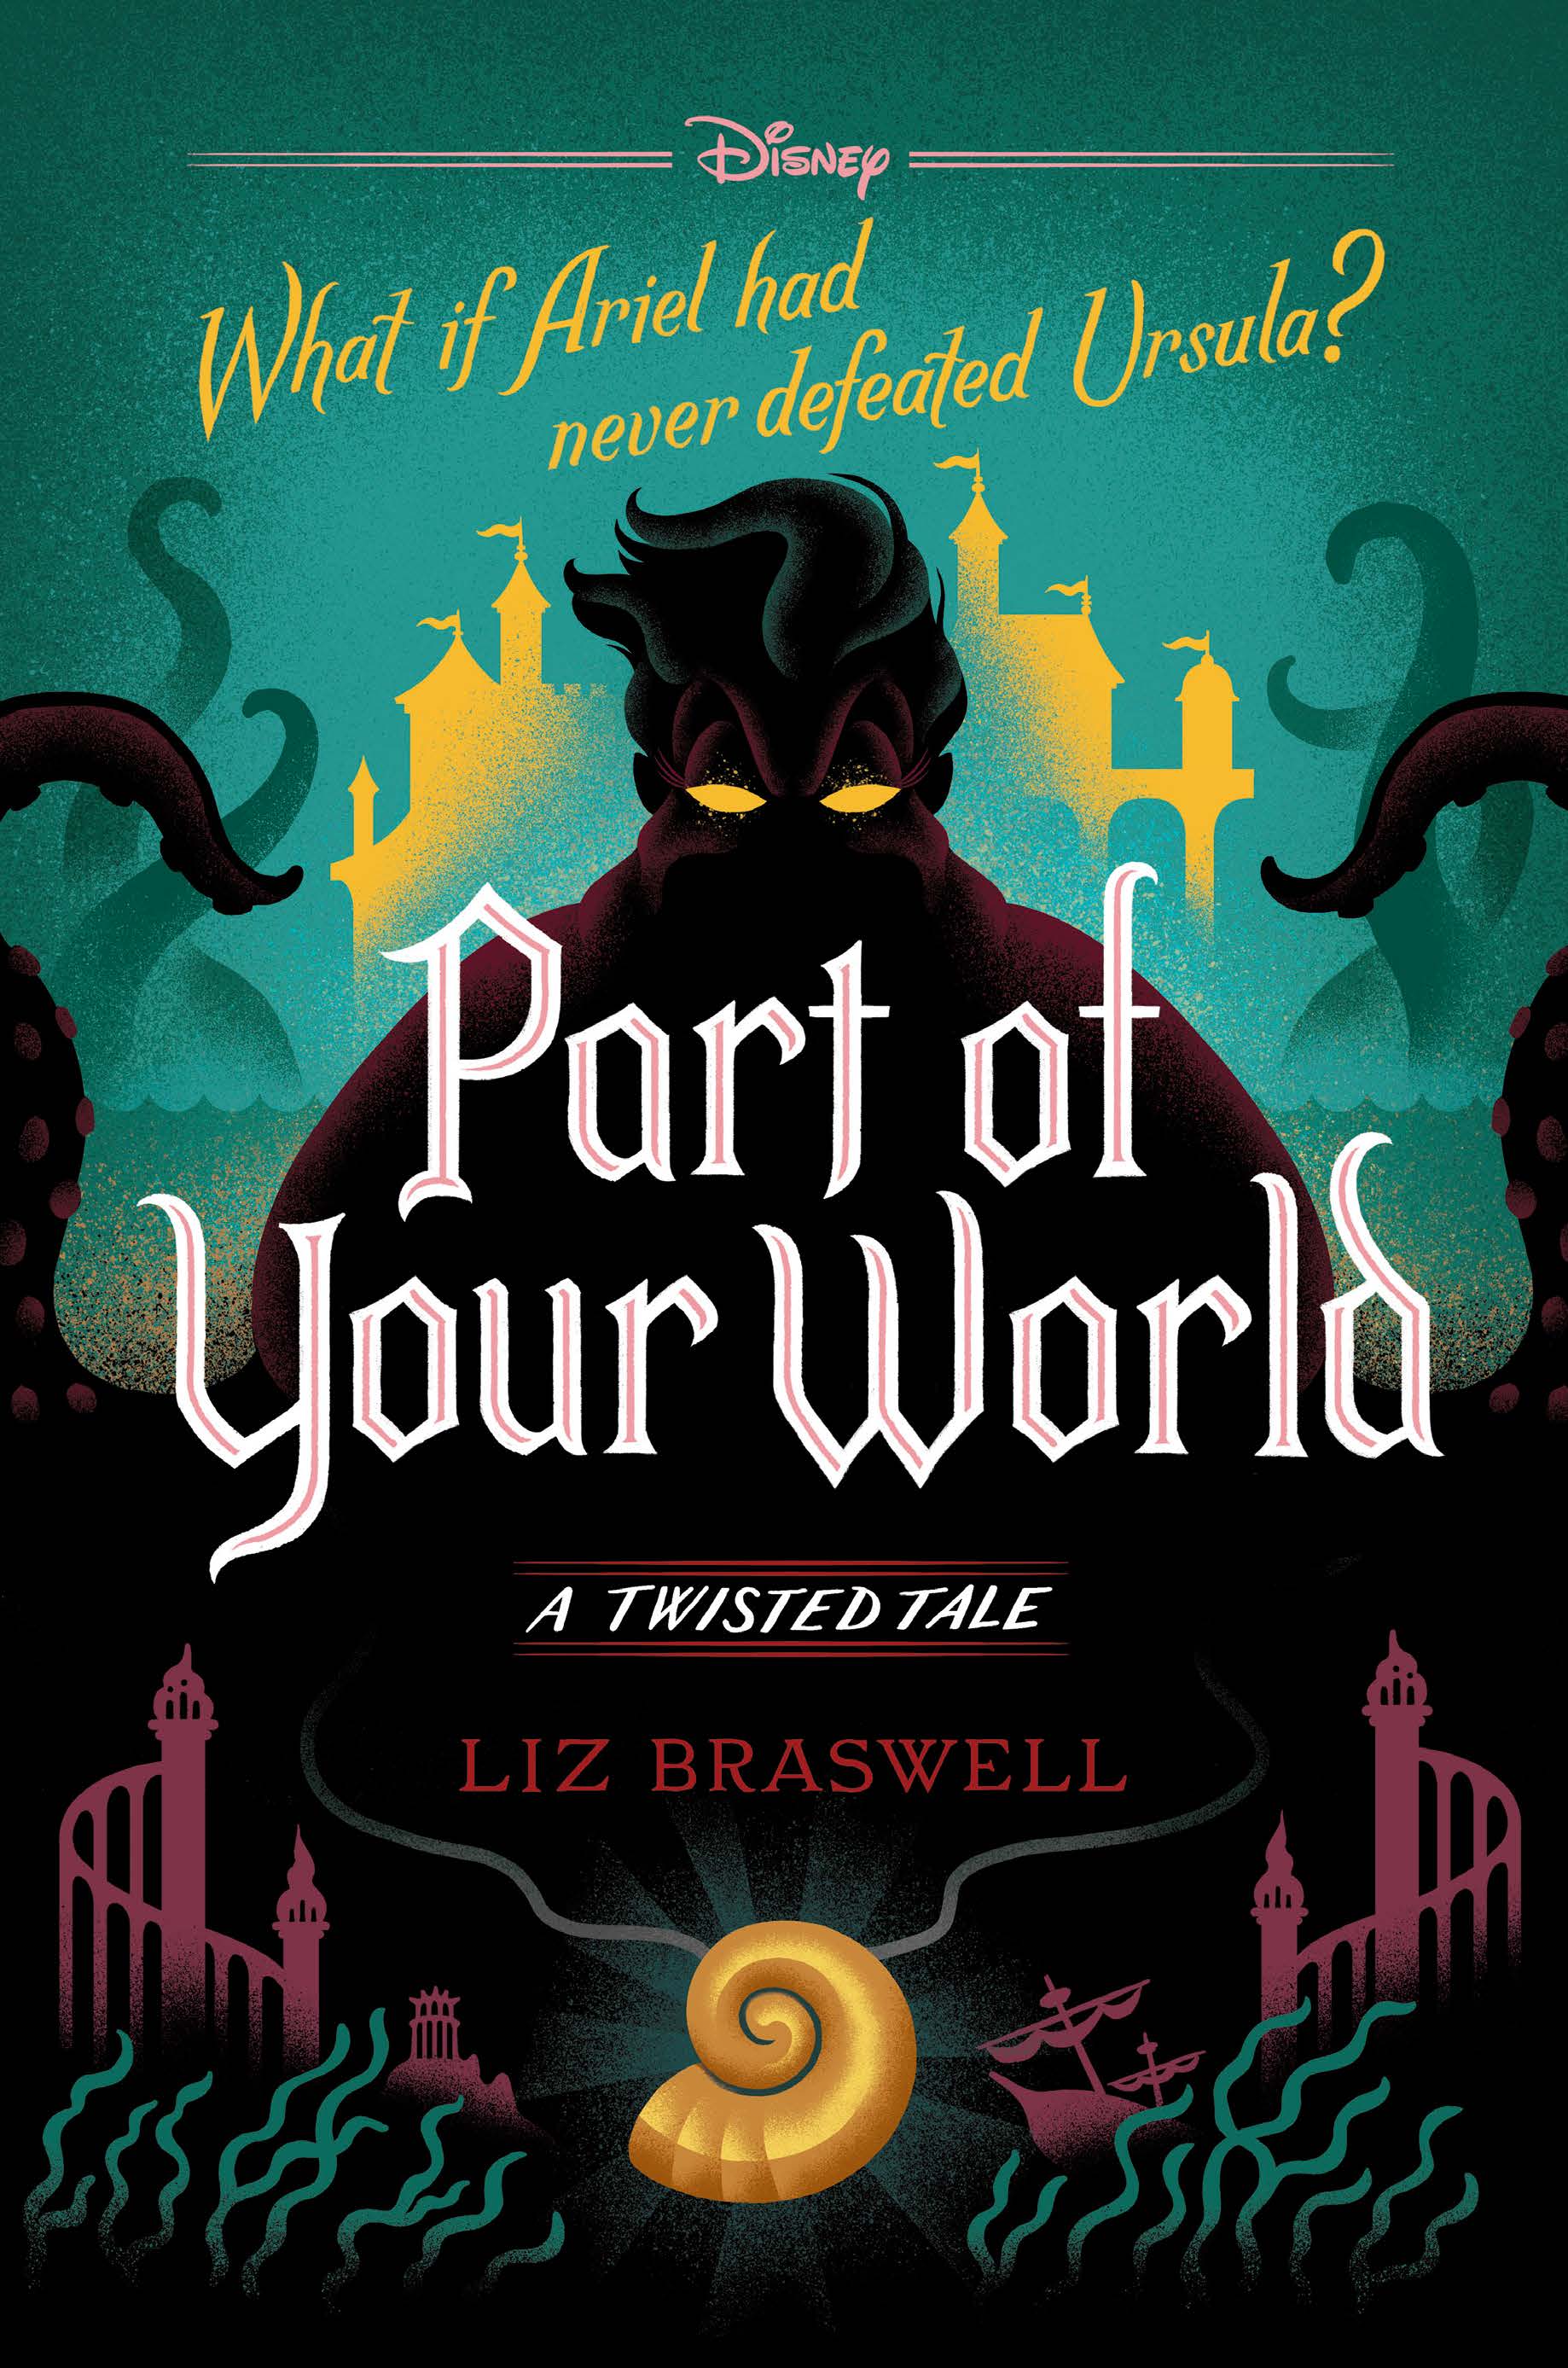 Part Of Your World A Twisted Tale by Liz Braswell - A Twisted Tale - Disney,  Princess, The Little Mermaid Books